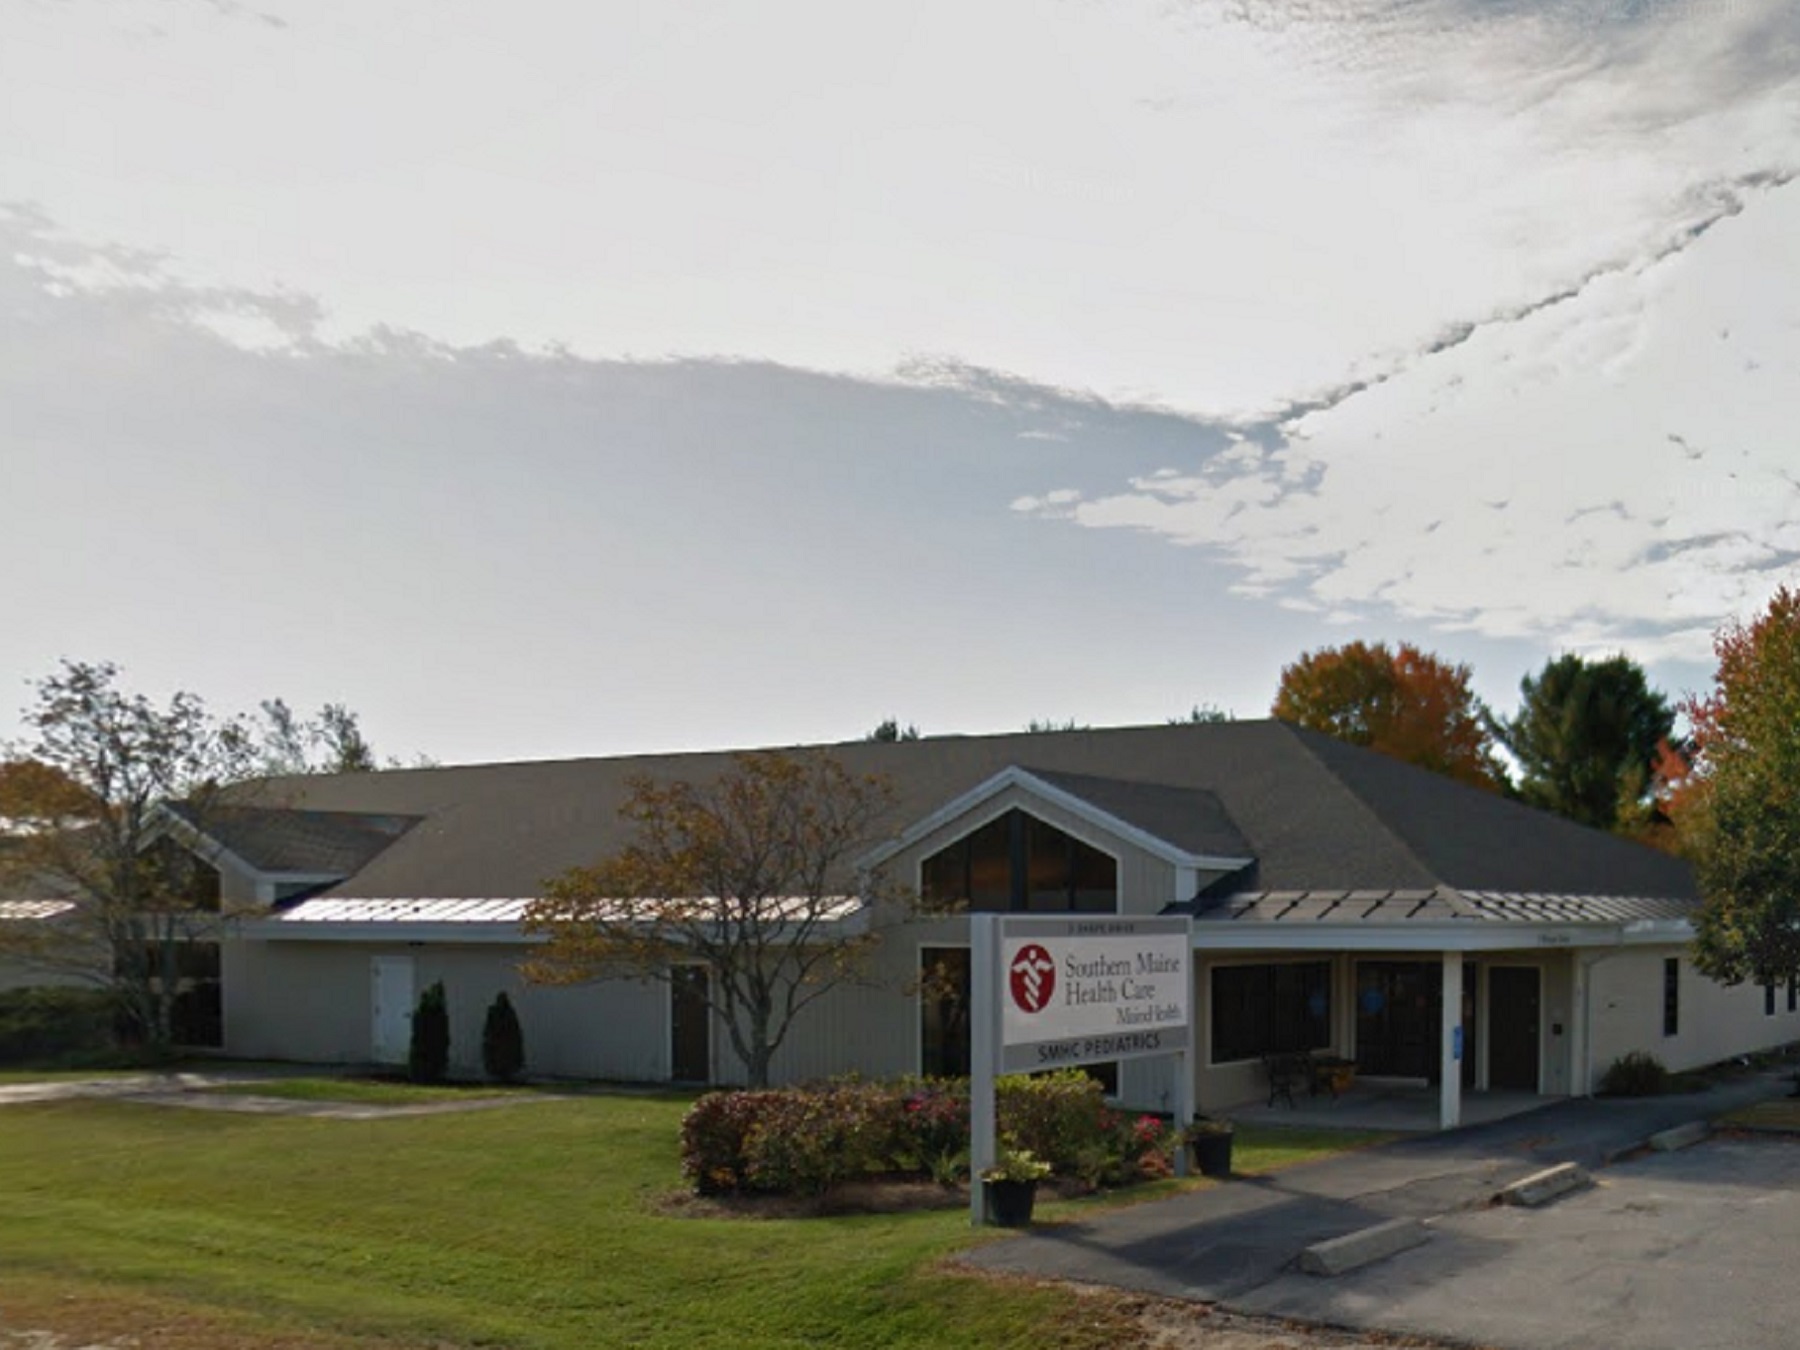 Southern Maine Health Care Pediatrics Is Located At 3 Shape Drive, Kennebunk, ME